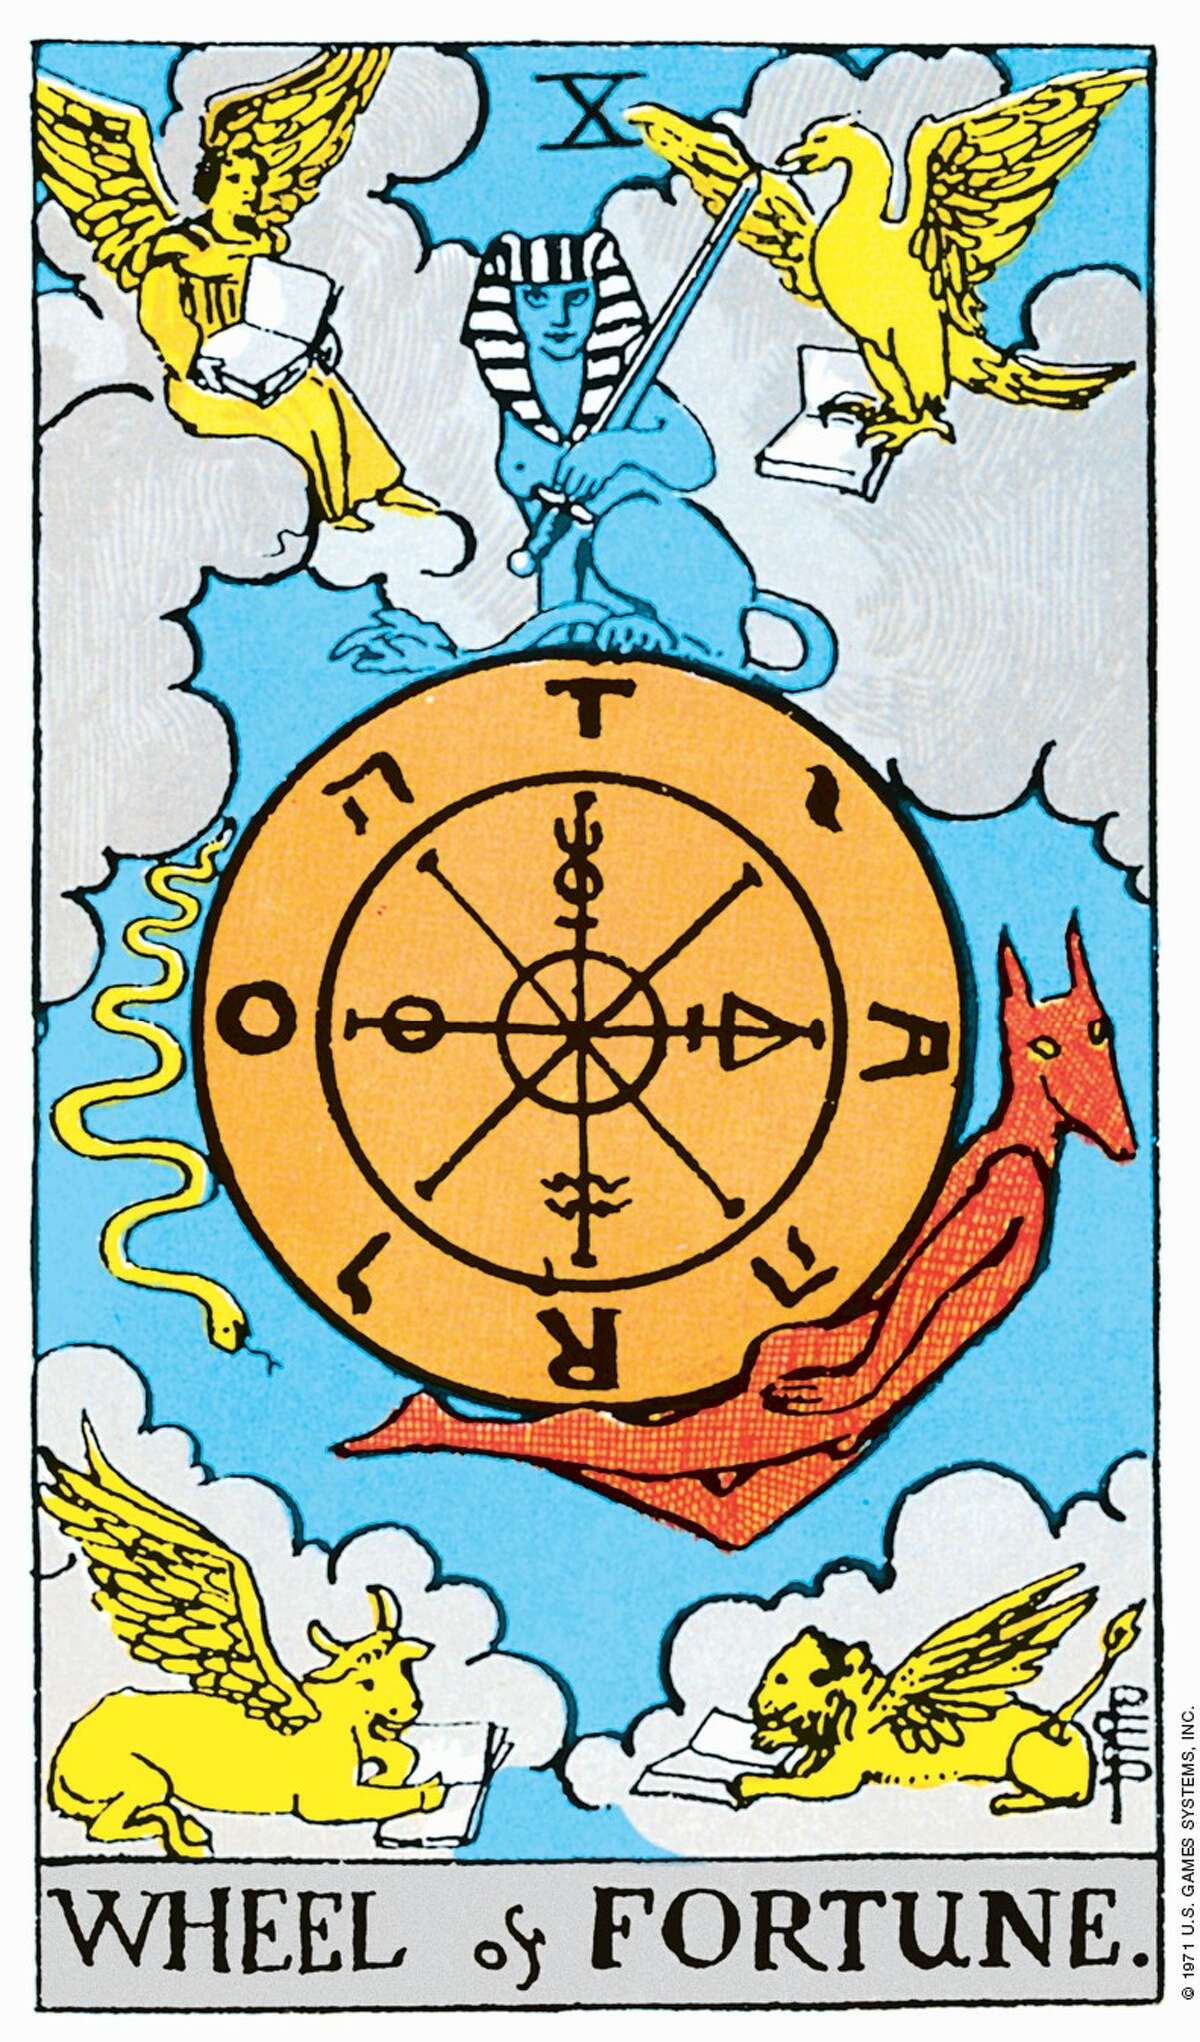 Tarot cards come in a variety of designs, but the Rider-Waite deck more or less set the standard for modern day tarot.  Shown here is the wheel of fortune from the Rider-Waite deck. 